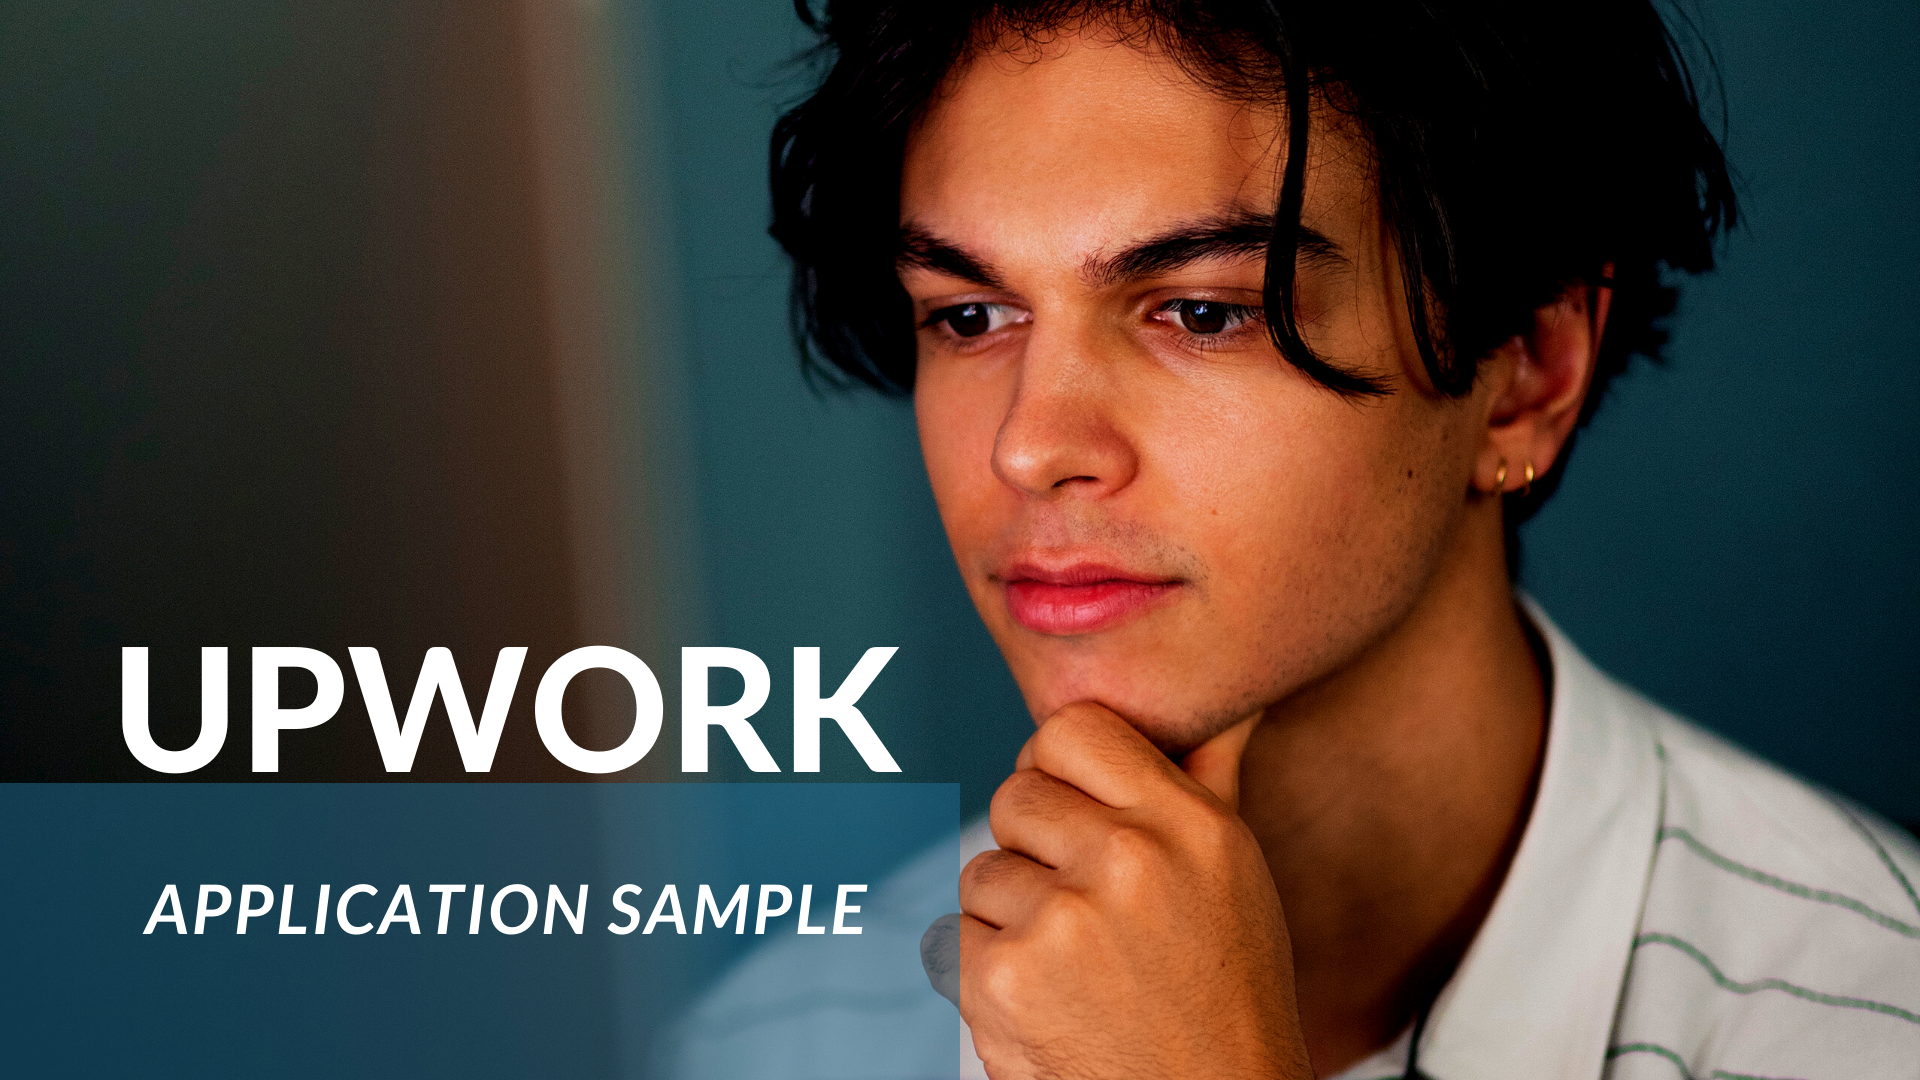 HOW TO WRITE AN APPLICATION IN UPWORK